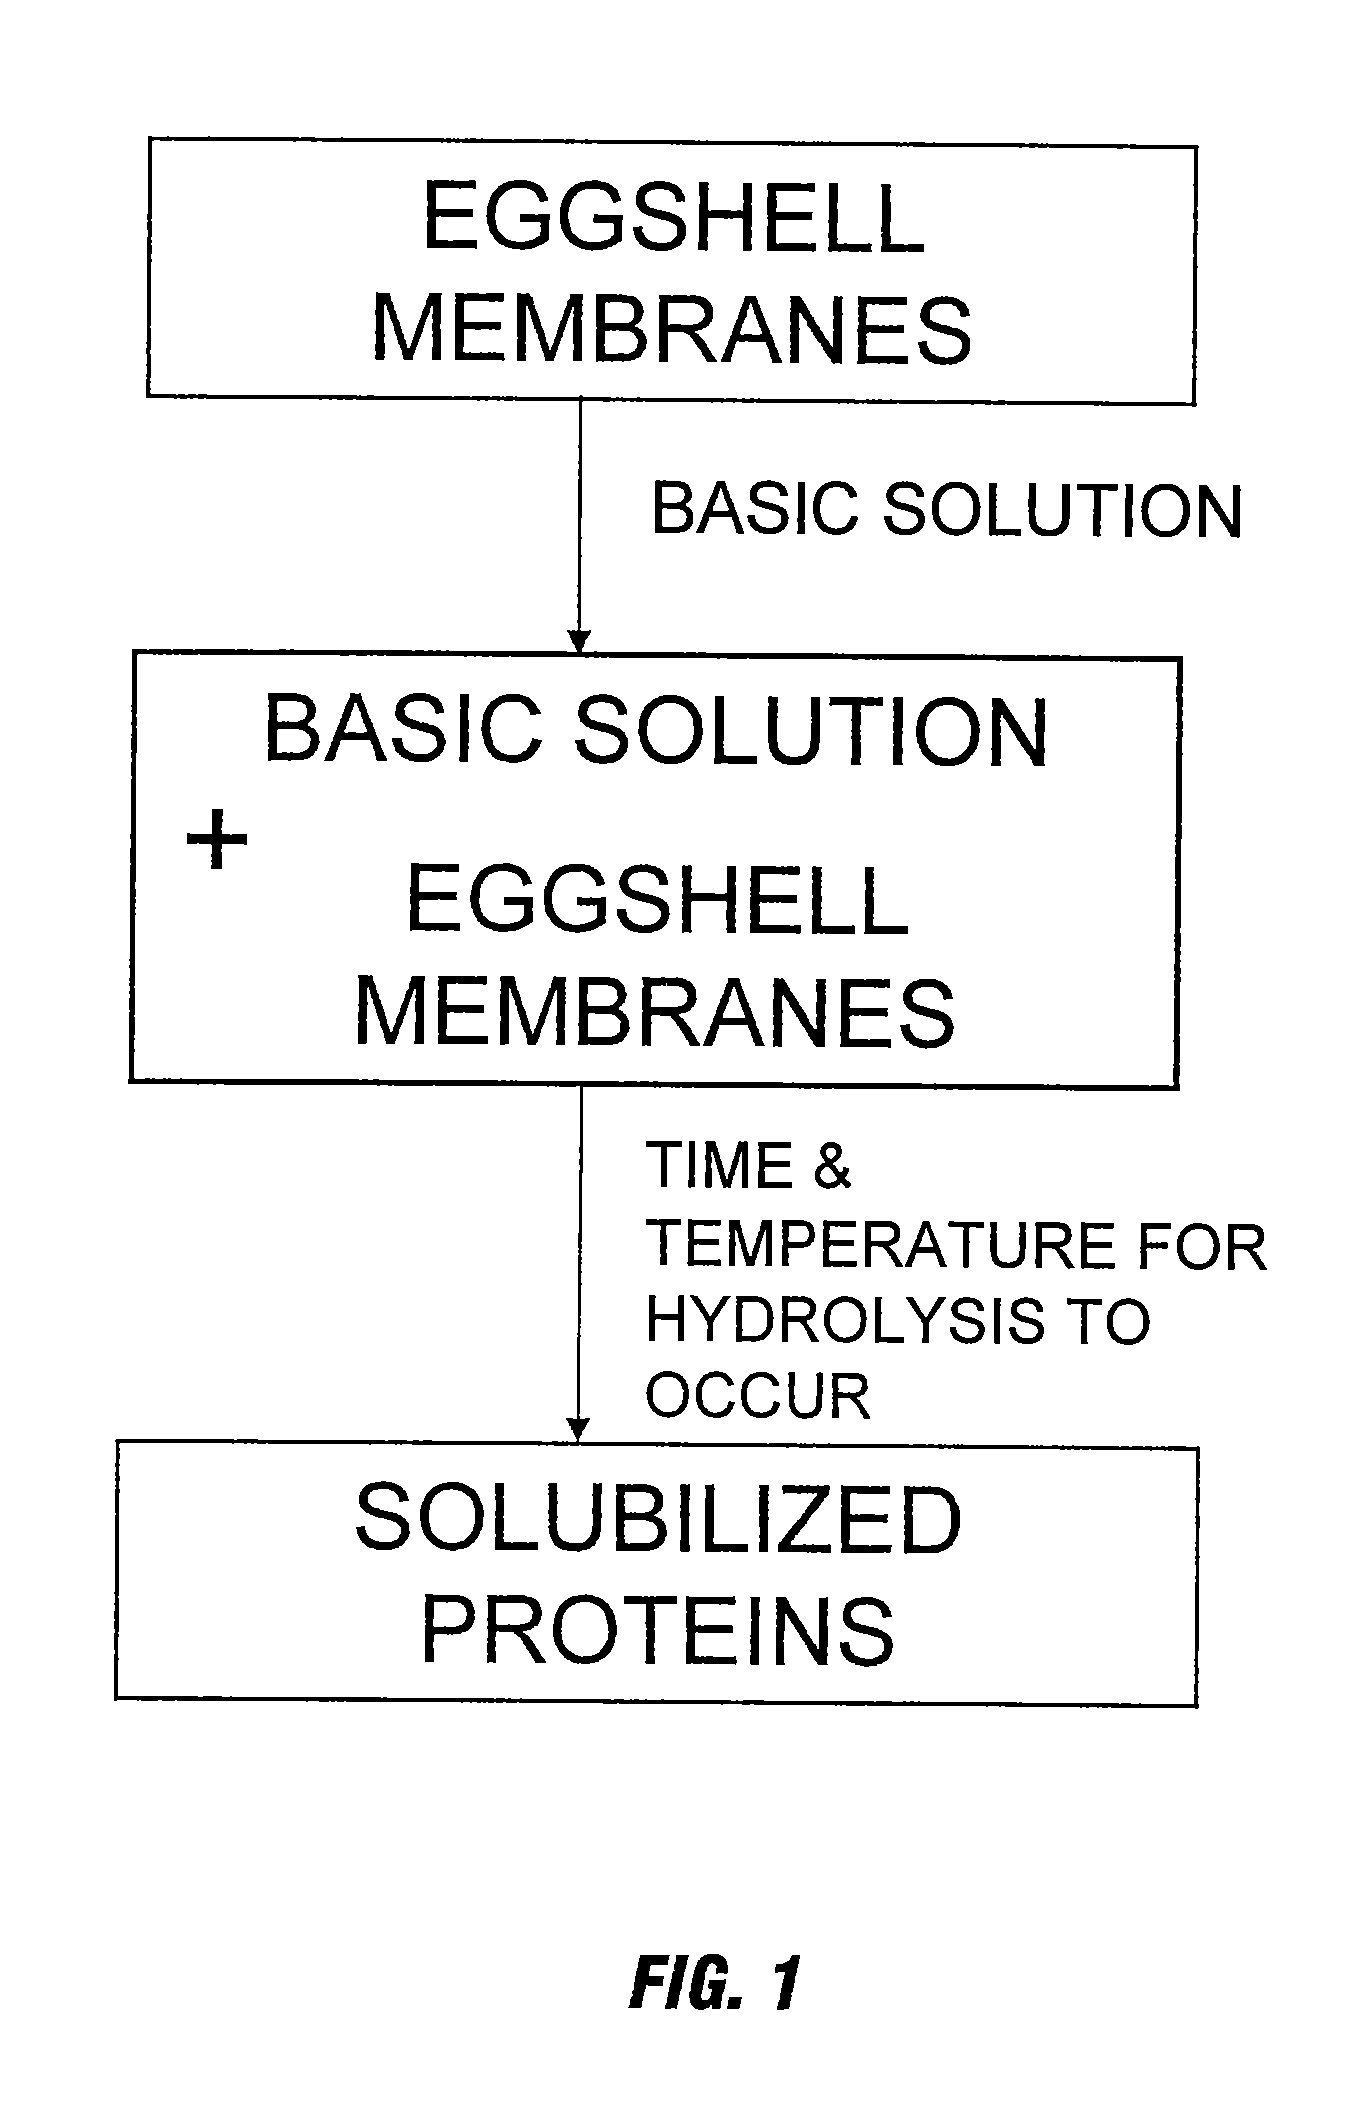 Novel process for solubilizing protein from a proteinaceous material and compositions thereof